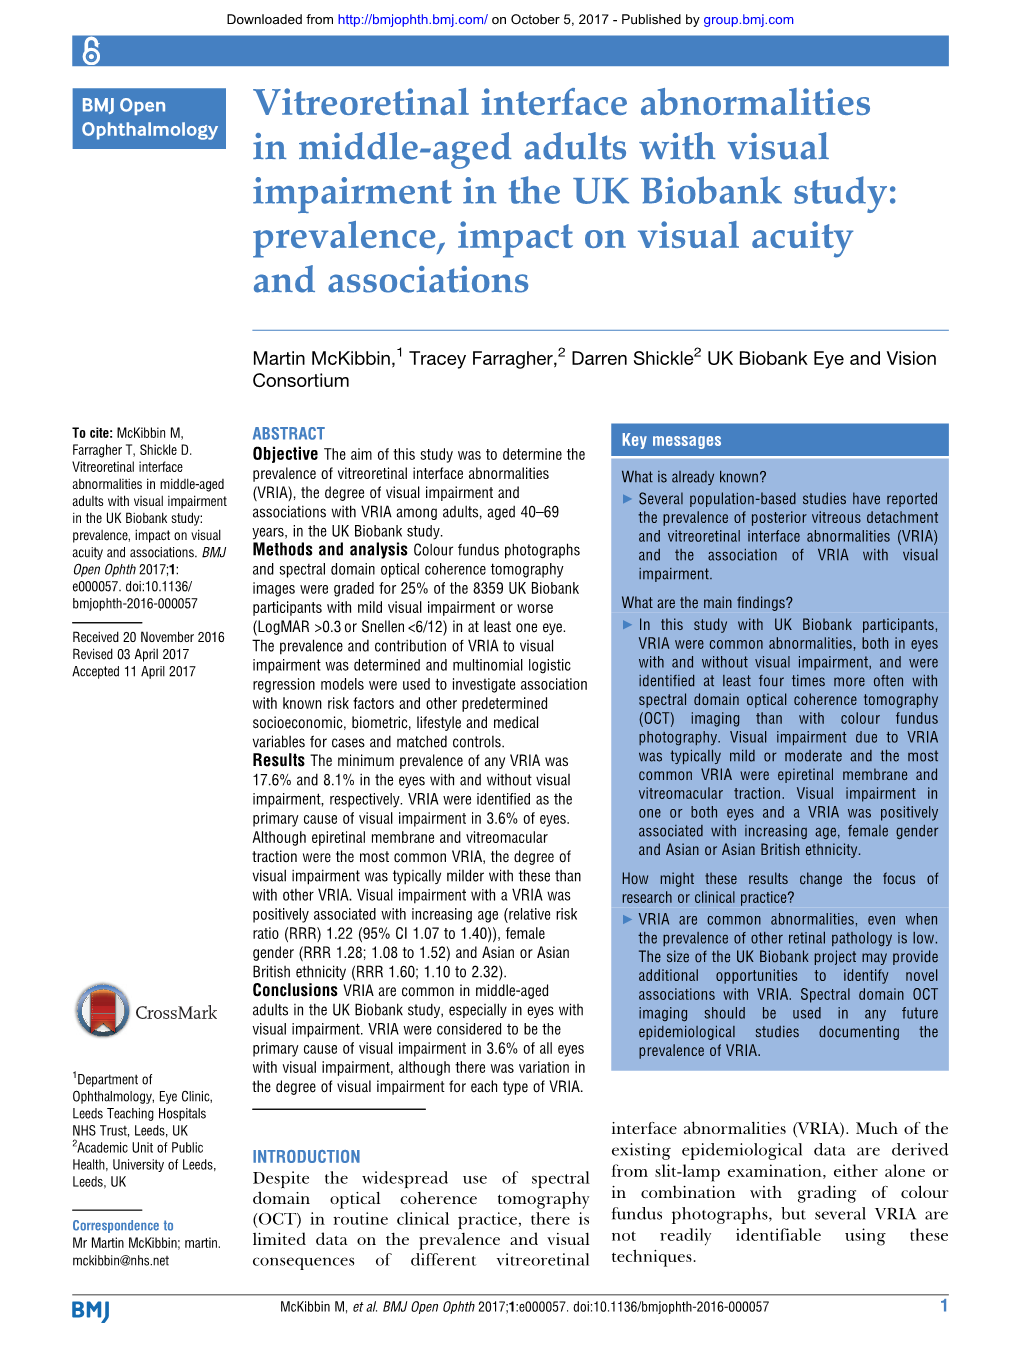 Vitreoretinal Interface Abnormalities in Middle-Aged Adults with Visual Impairment in the UK Biobank Study: Prevalence, Impact on Visual Acuity and Associations